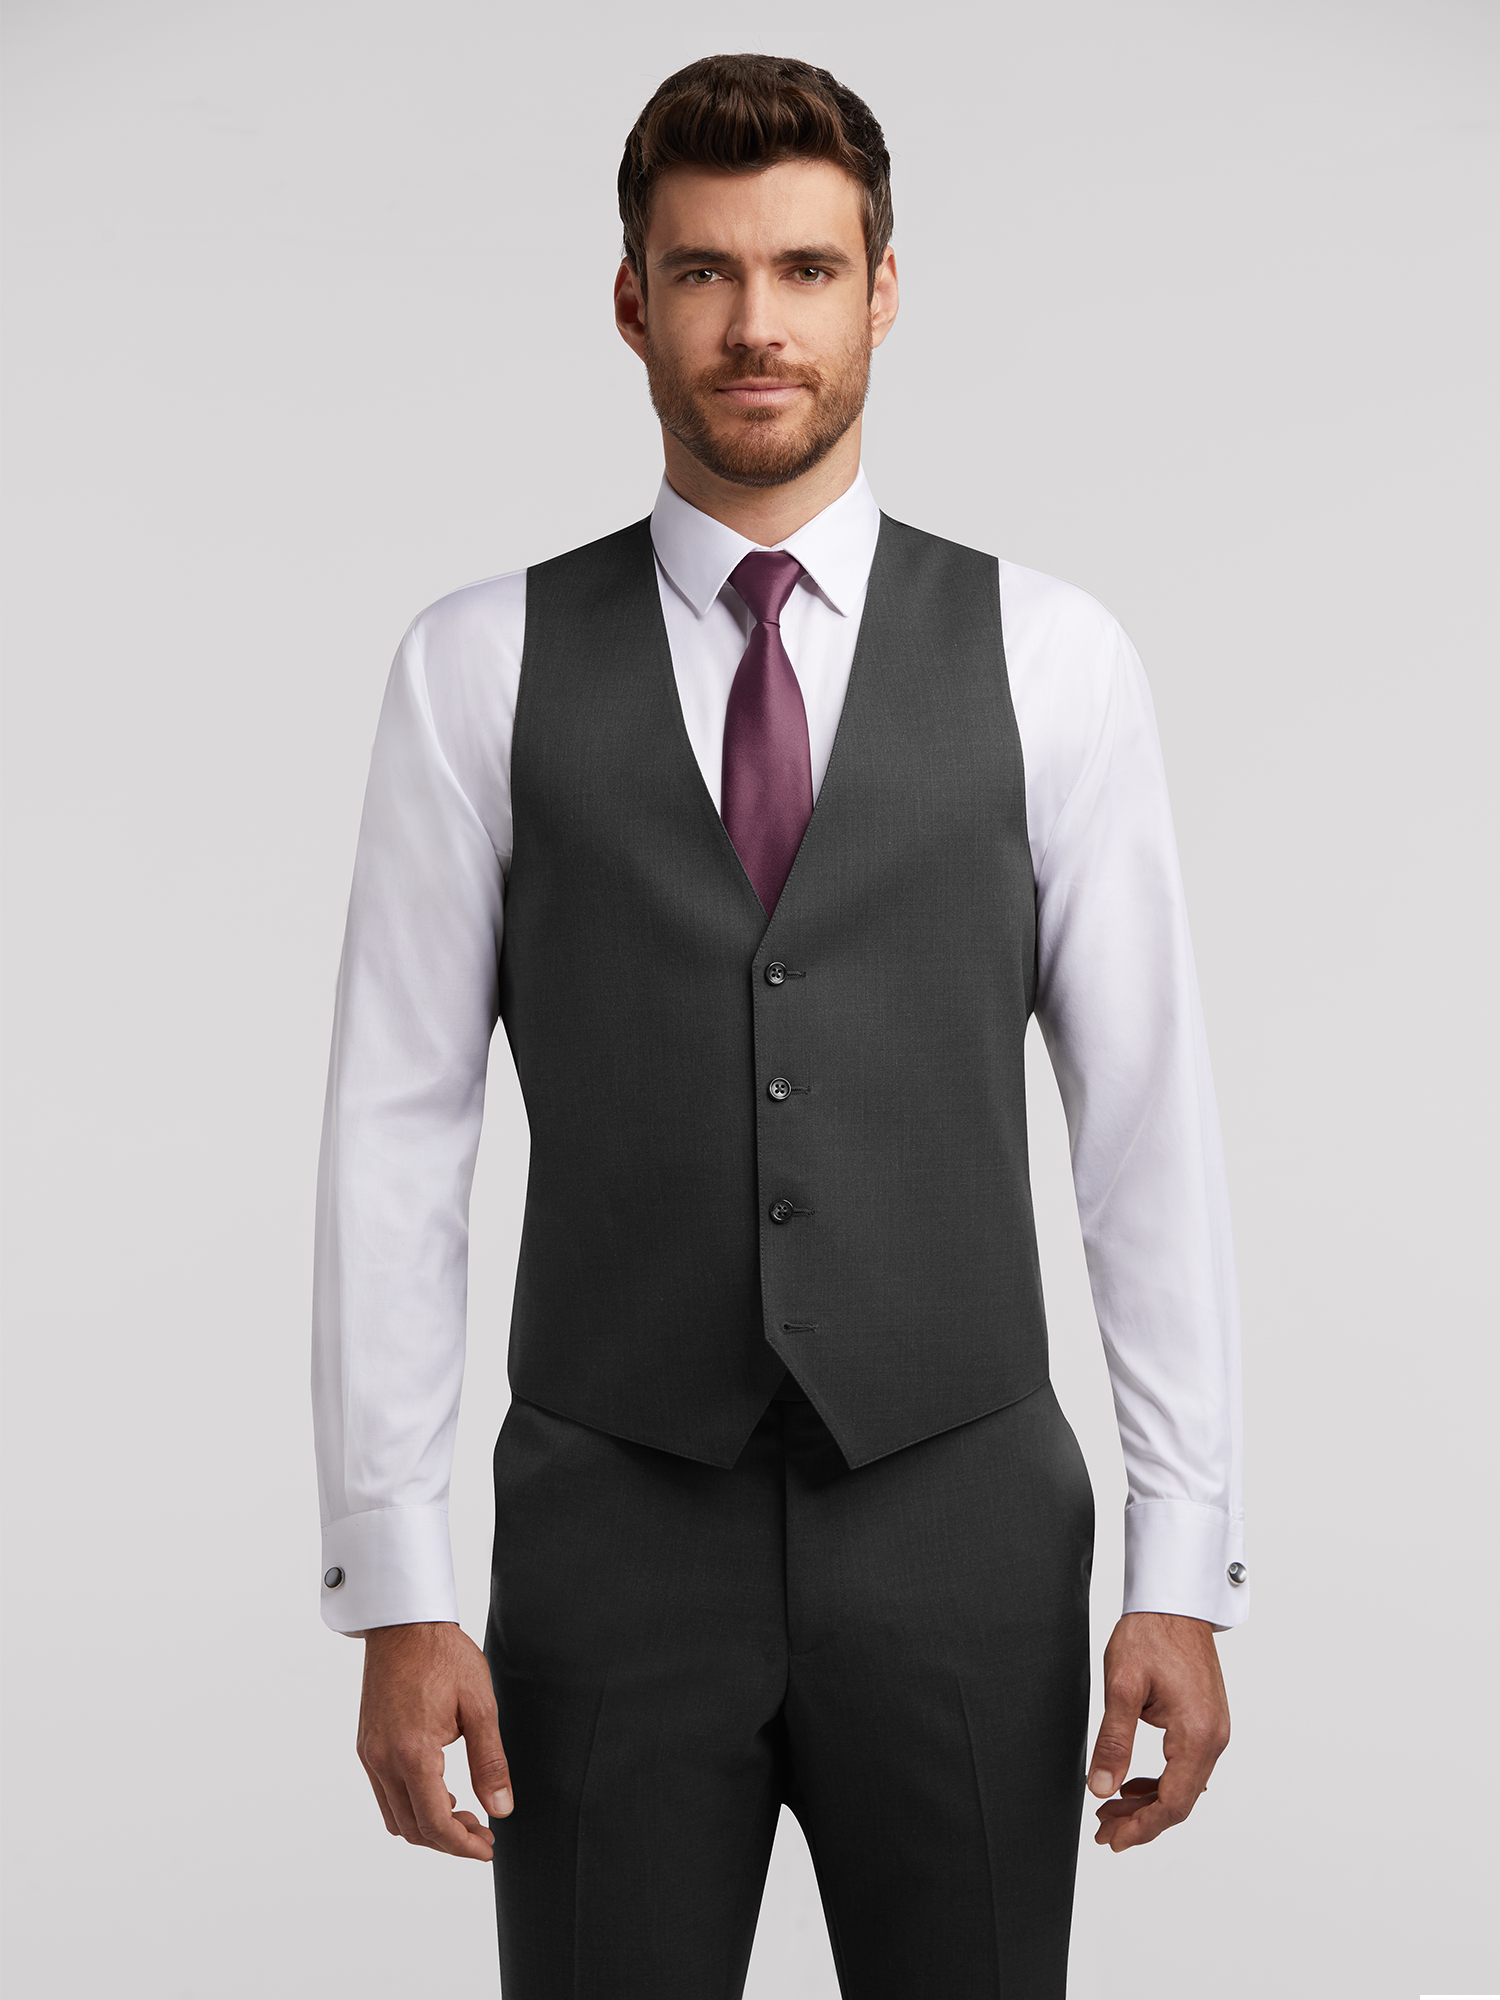 Performance Grey Suit by Calvin Klein | Suit Rental | Moores Clothing